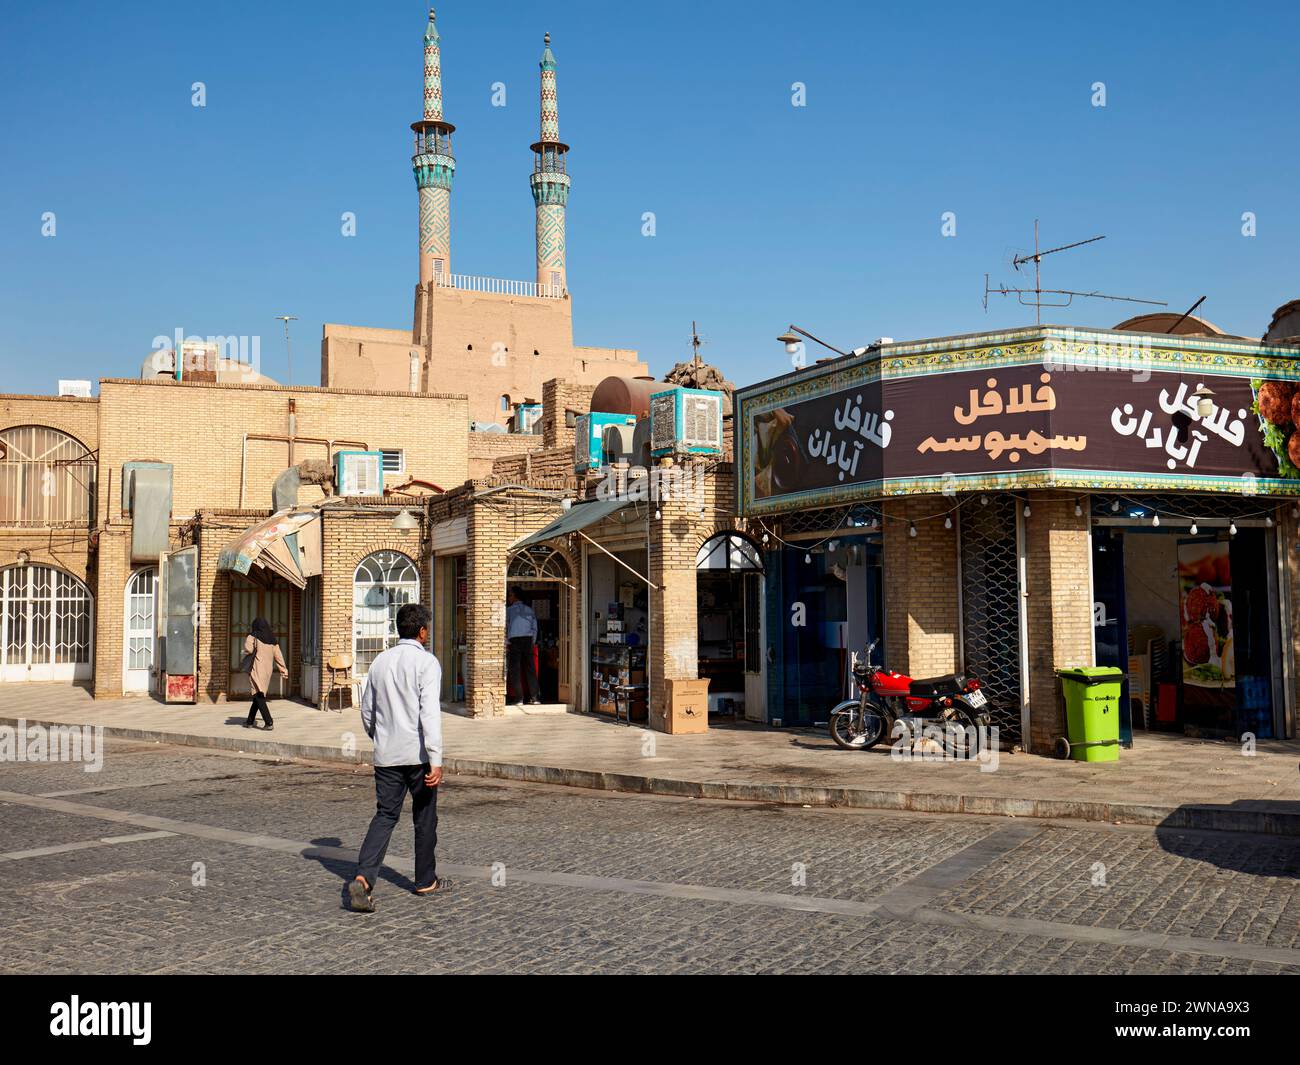 A man crosses the street in the historic town of Yazd, Iran. Stock Photo